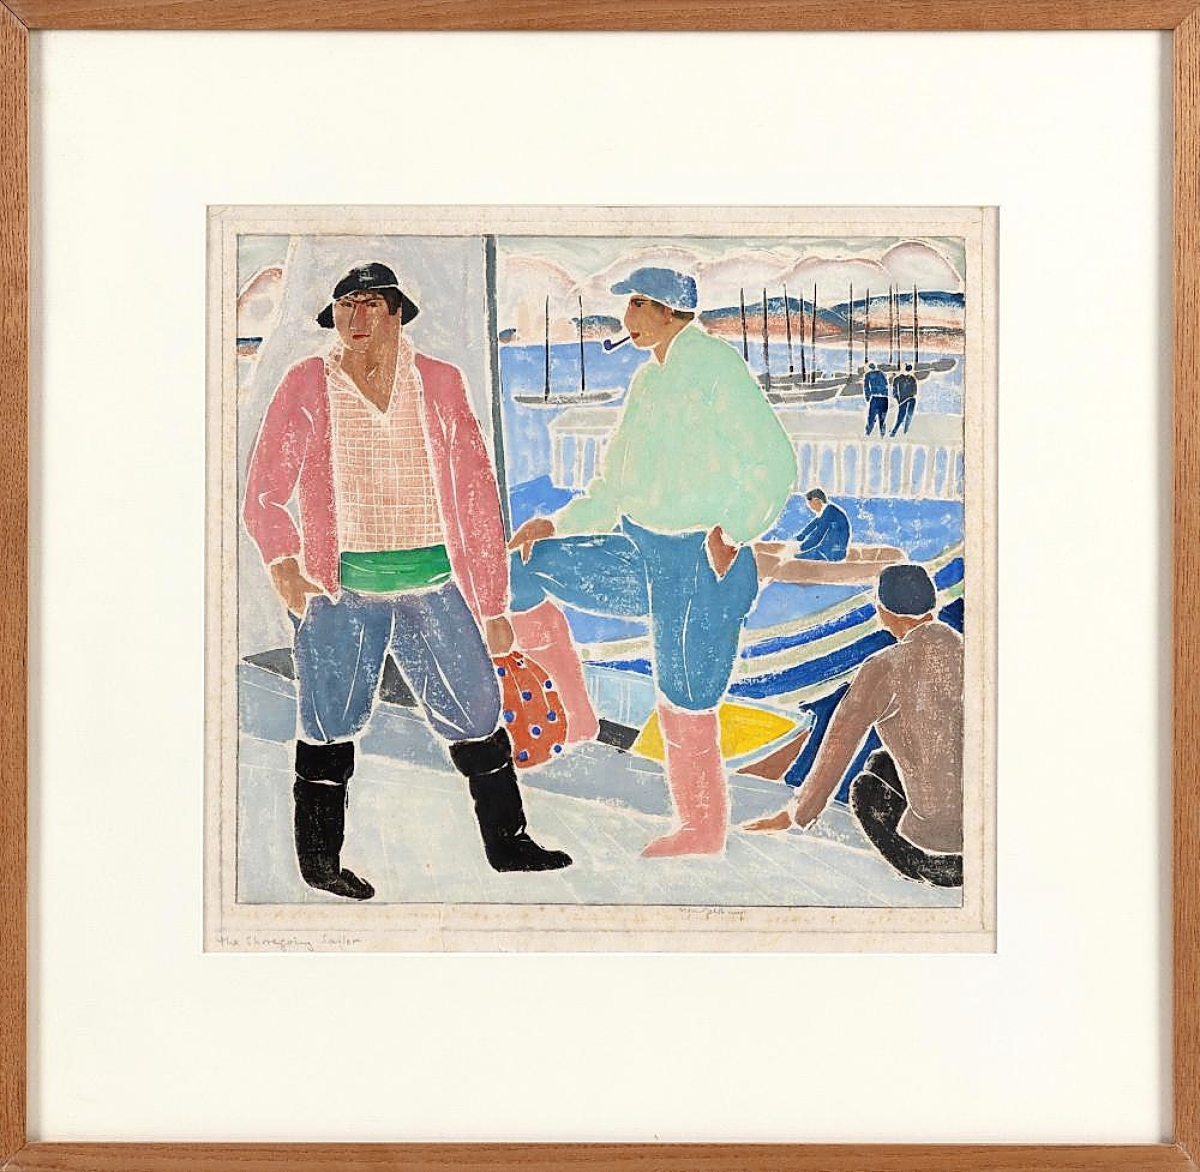 Bror Julius Olsson Nordfeldt’s whiteline print “The Shoregoing Sailor” measured 19 by 20 inches in the frame and sold to a phone bidder for $87,500. Eldred and his team could not find any auction records of the work selling previously ($3/5,000).